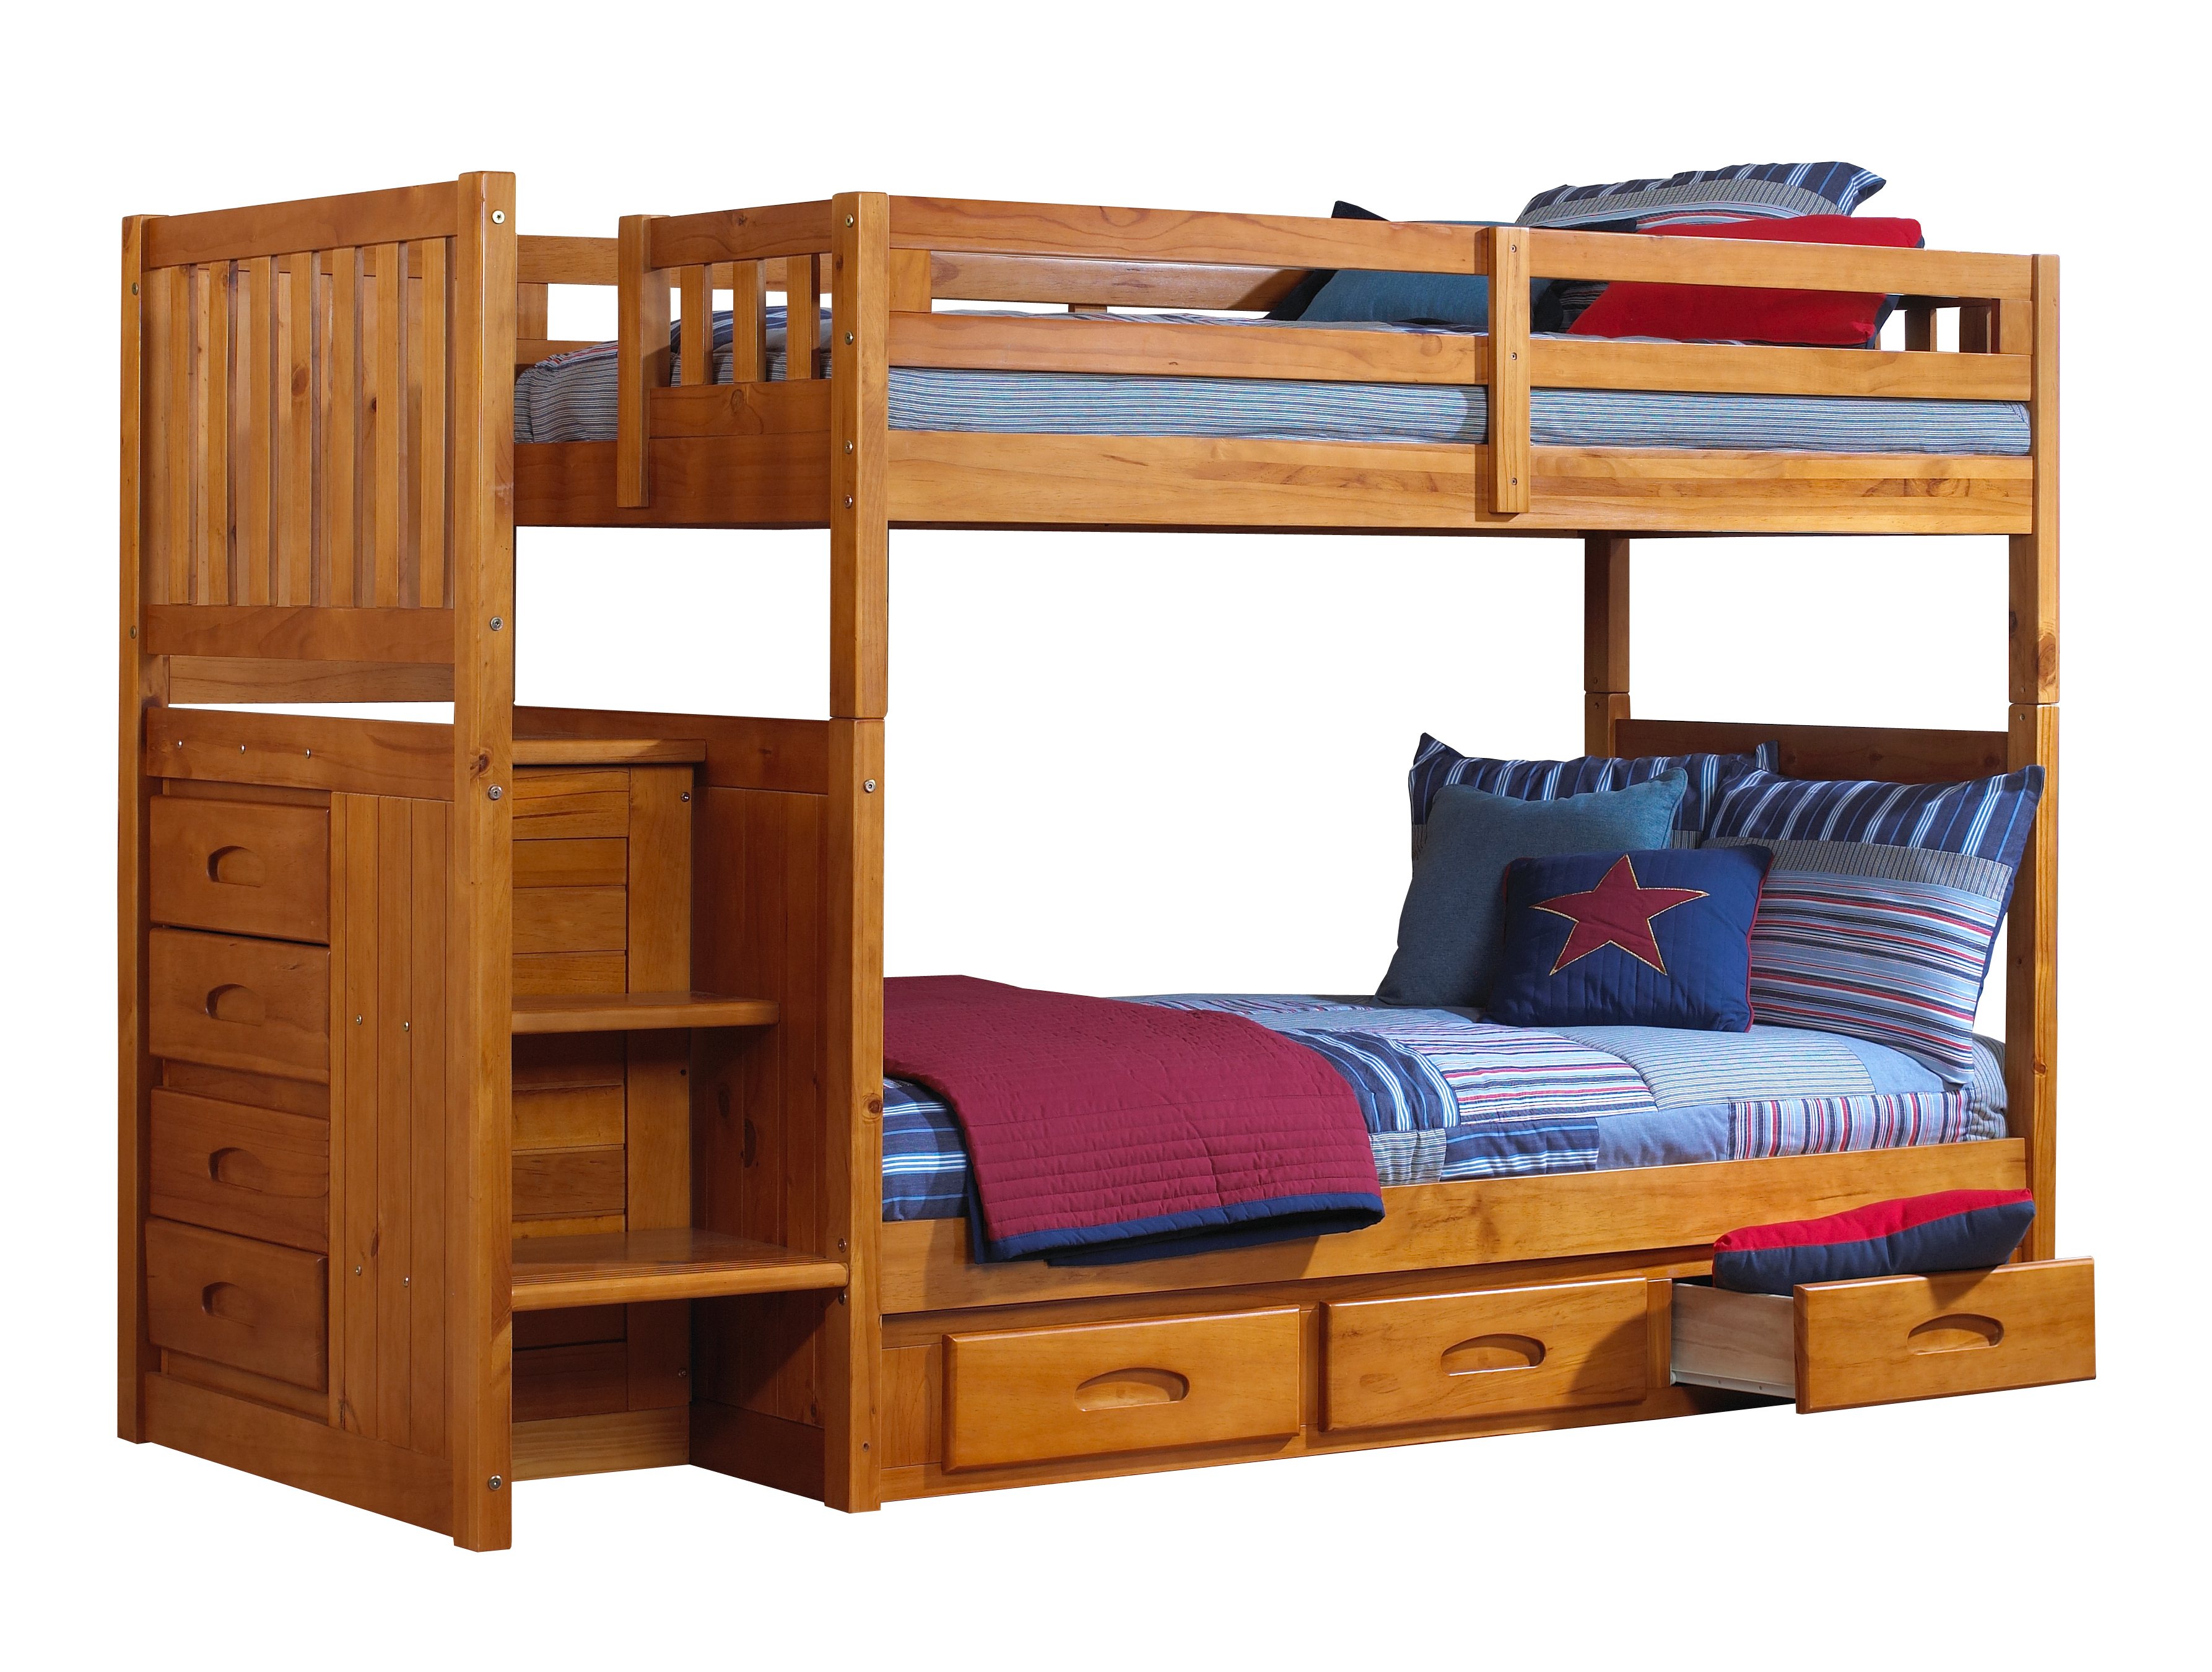 Twin Honey Mission Staircase Bunk Beds, Stairway Twin Bunk Bed Mattress Set Of 2